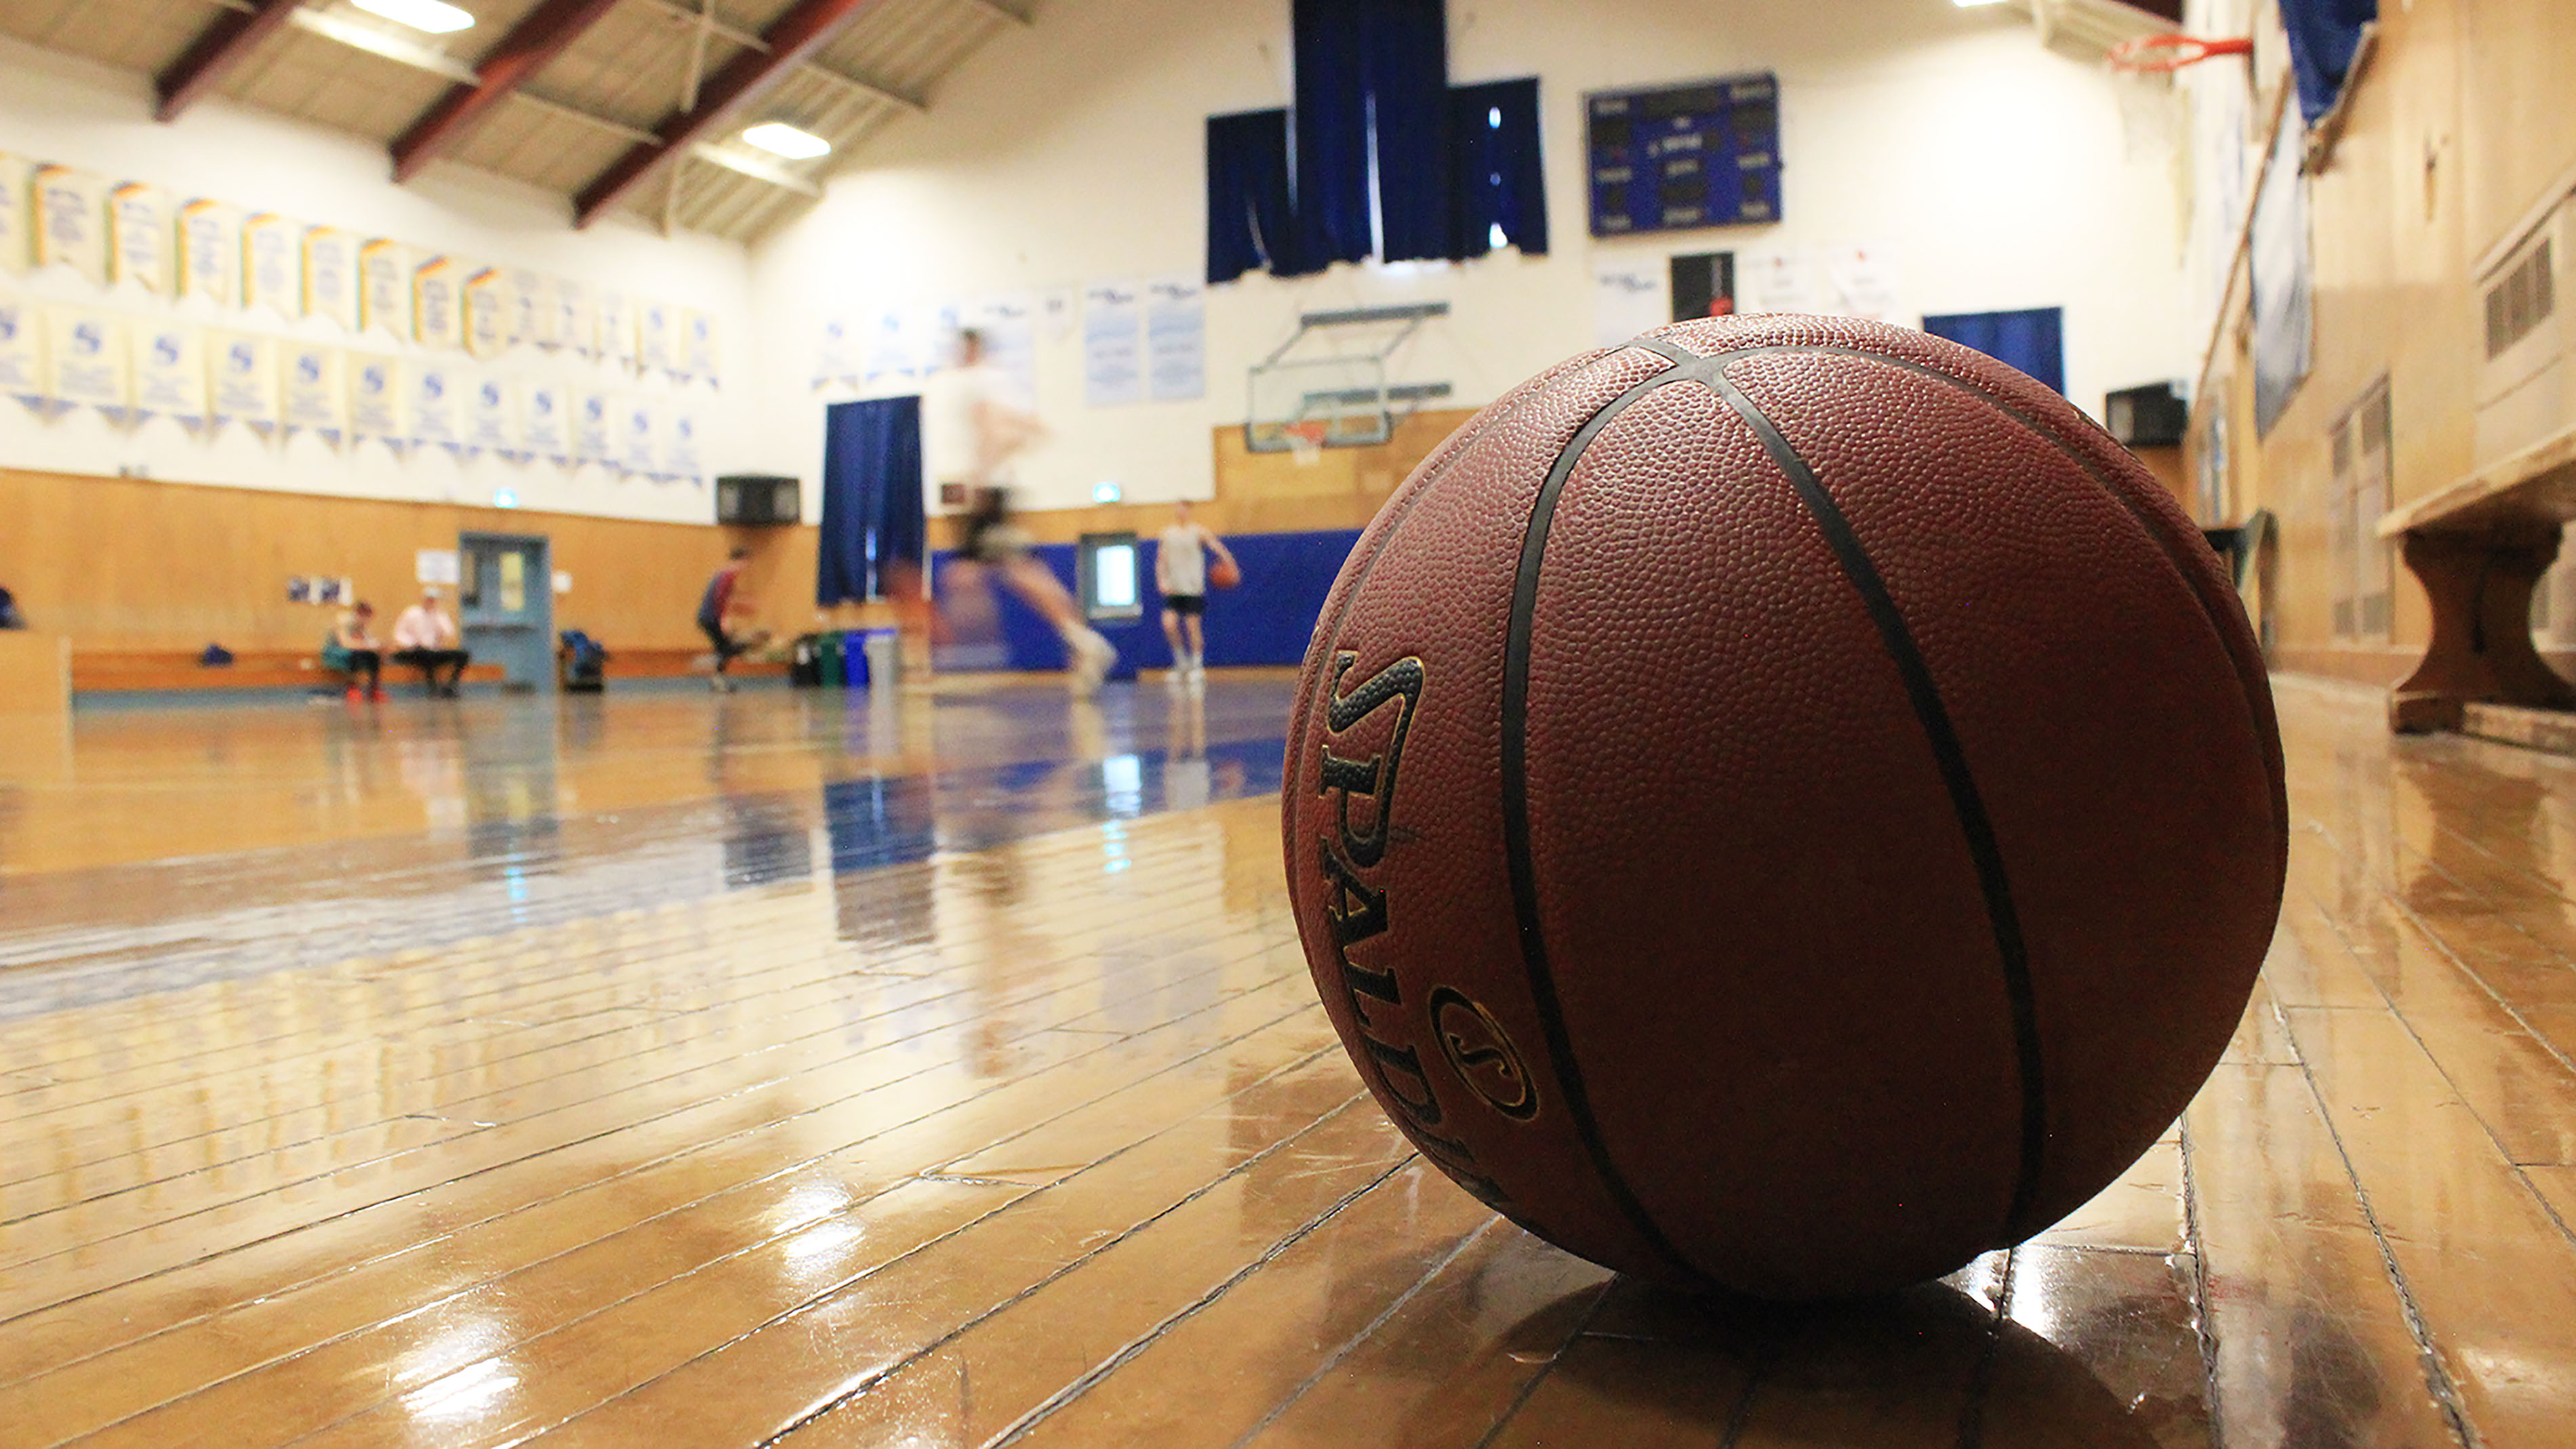 “First and foremost, we want to make sure that the children are safe,” said Sean François, parent and coach with Basketball Nova Scotia and the Cole Harbour Rockets. François acknowledges background checks can be time-consuming, but they are necessary.